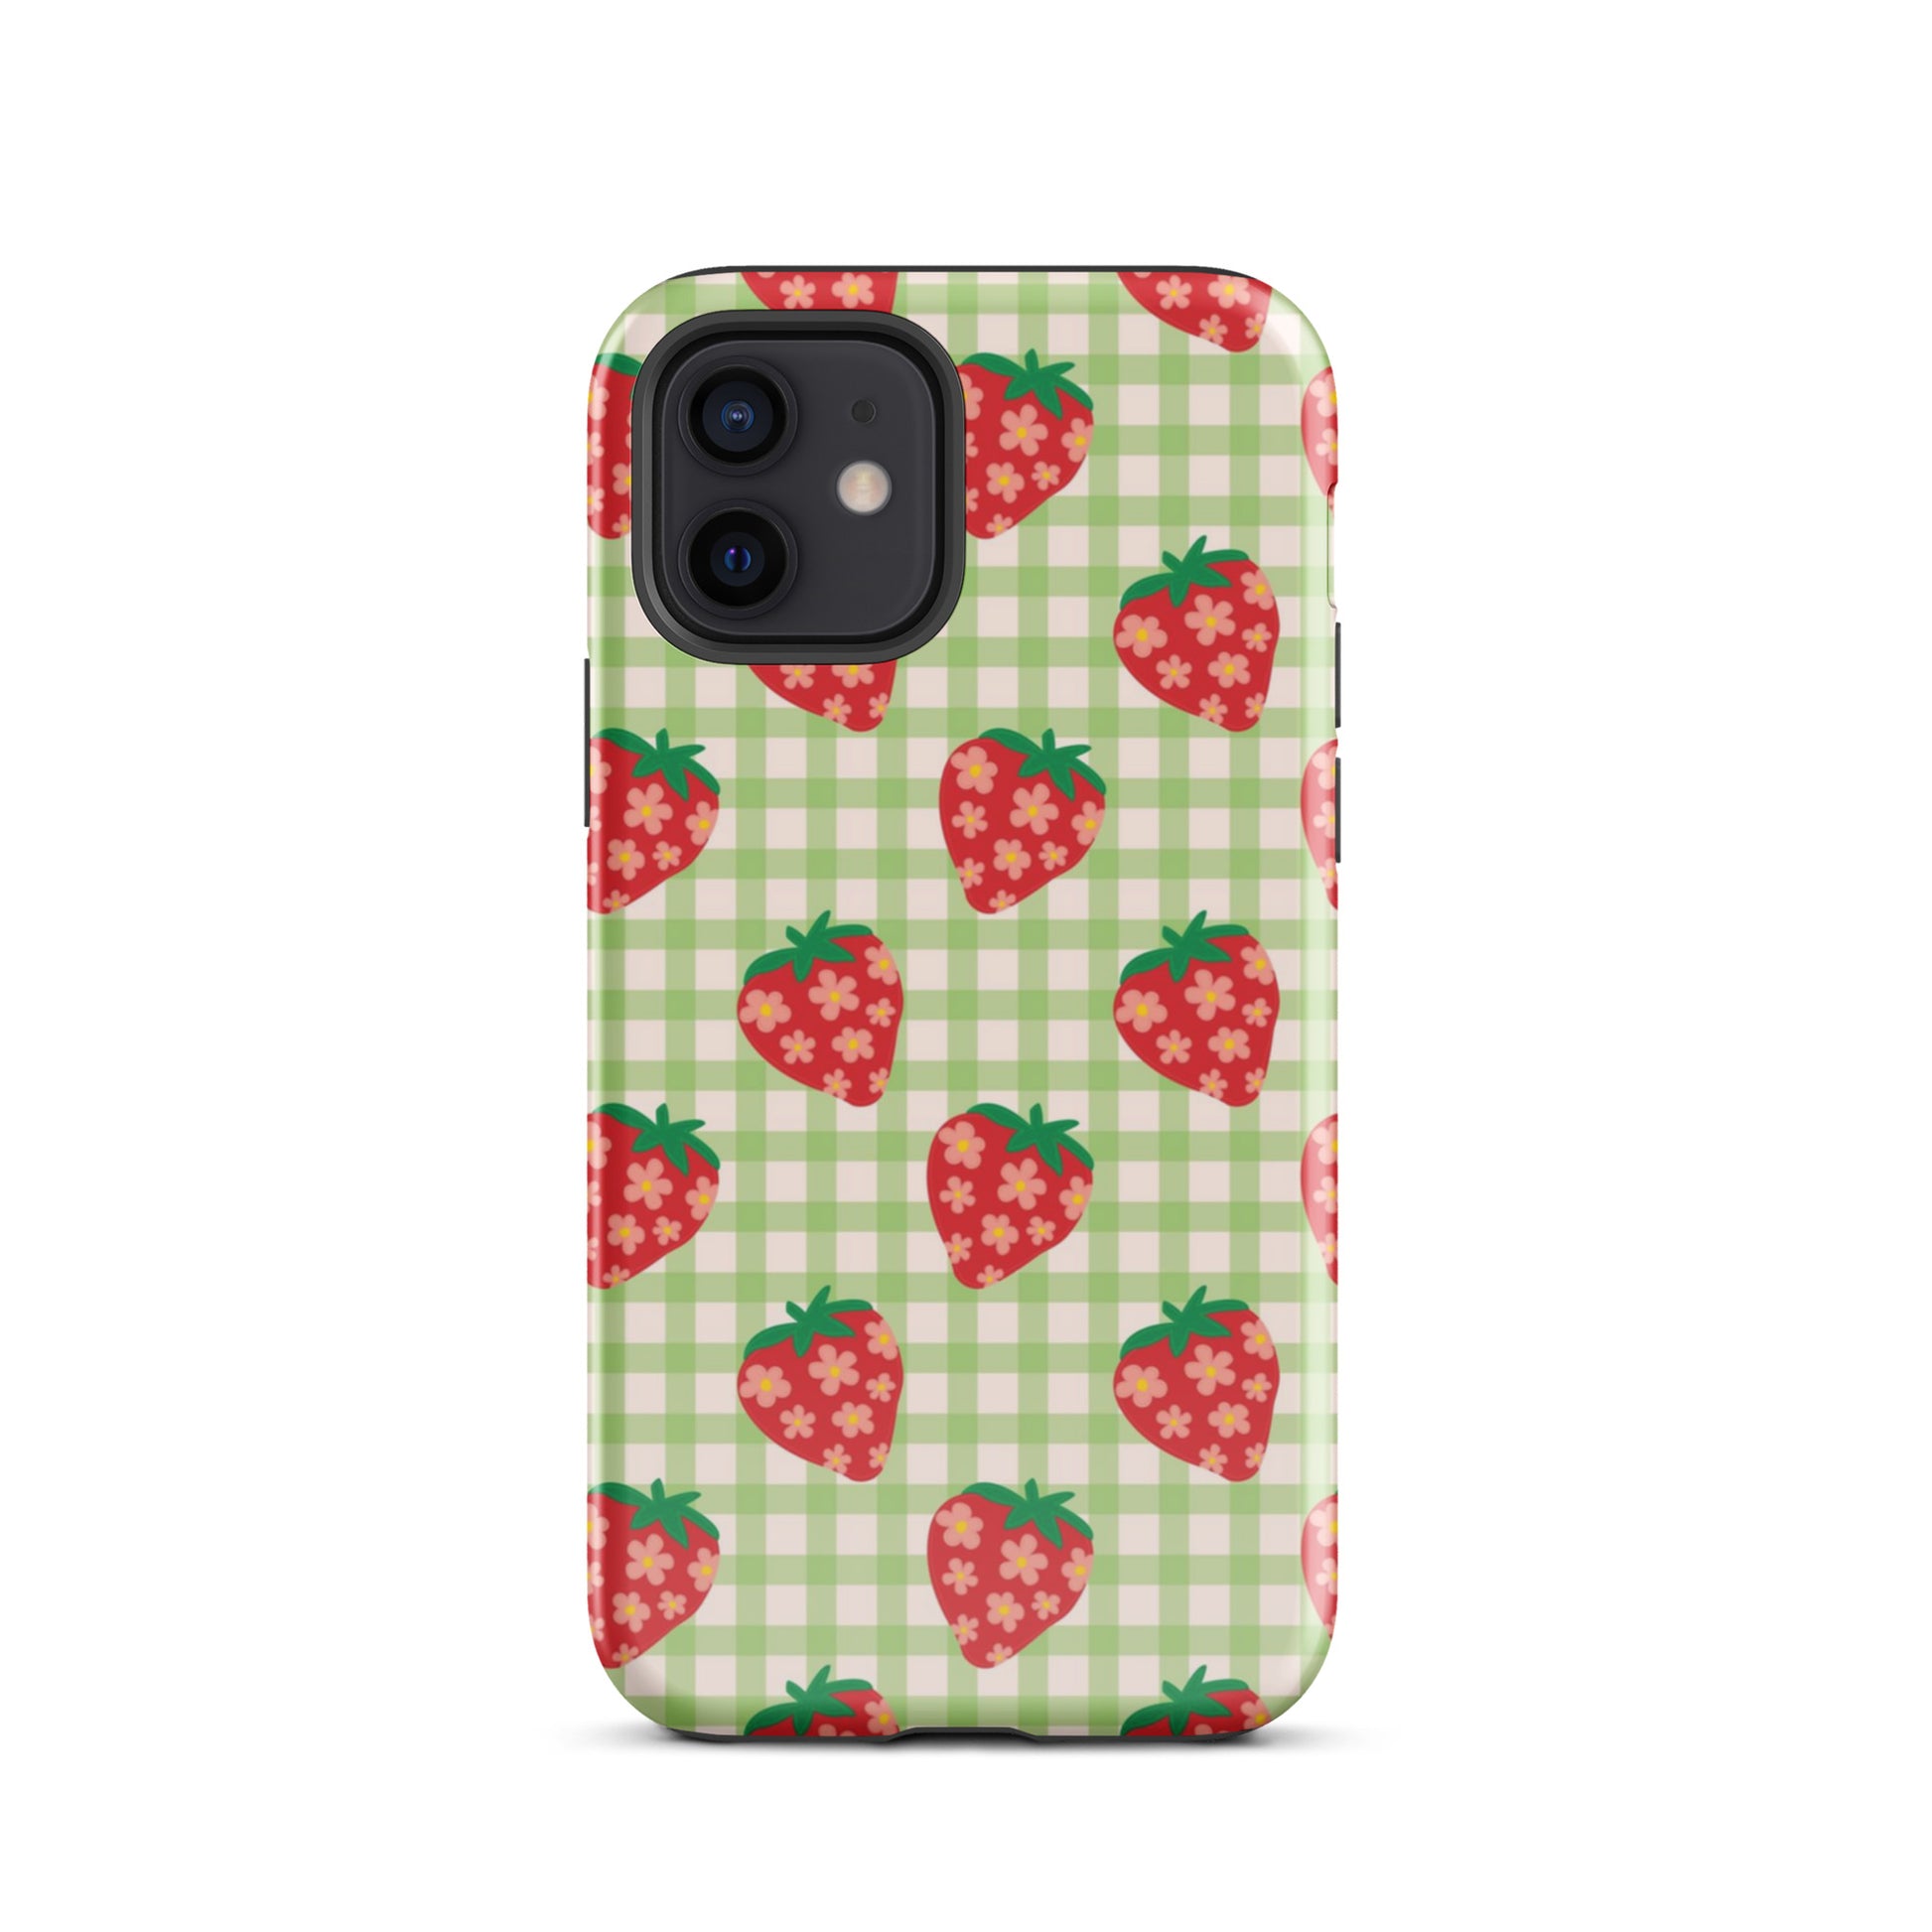 Strawberry Picnic iPhone Case iPhone 12 Glossy